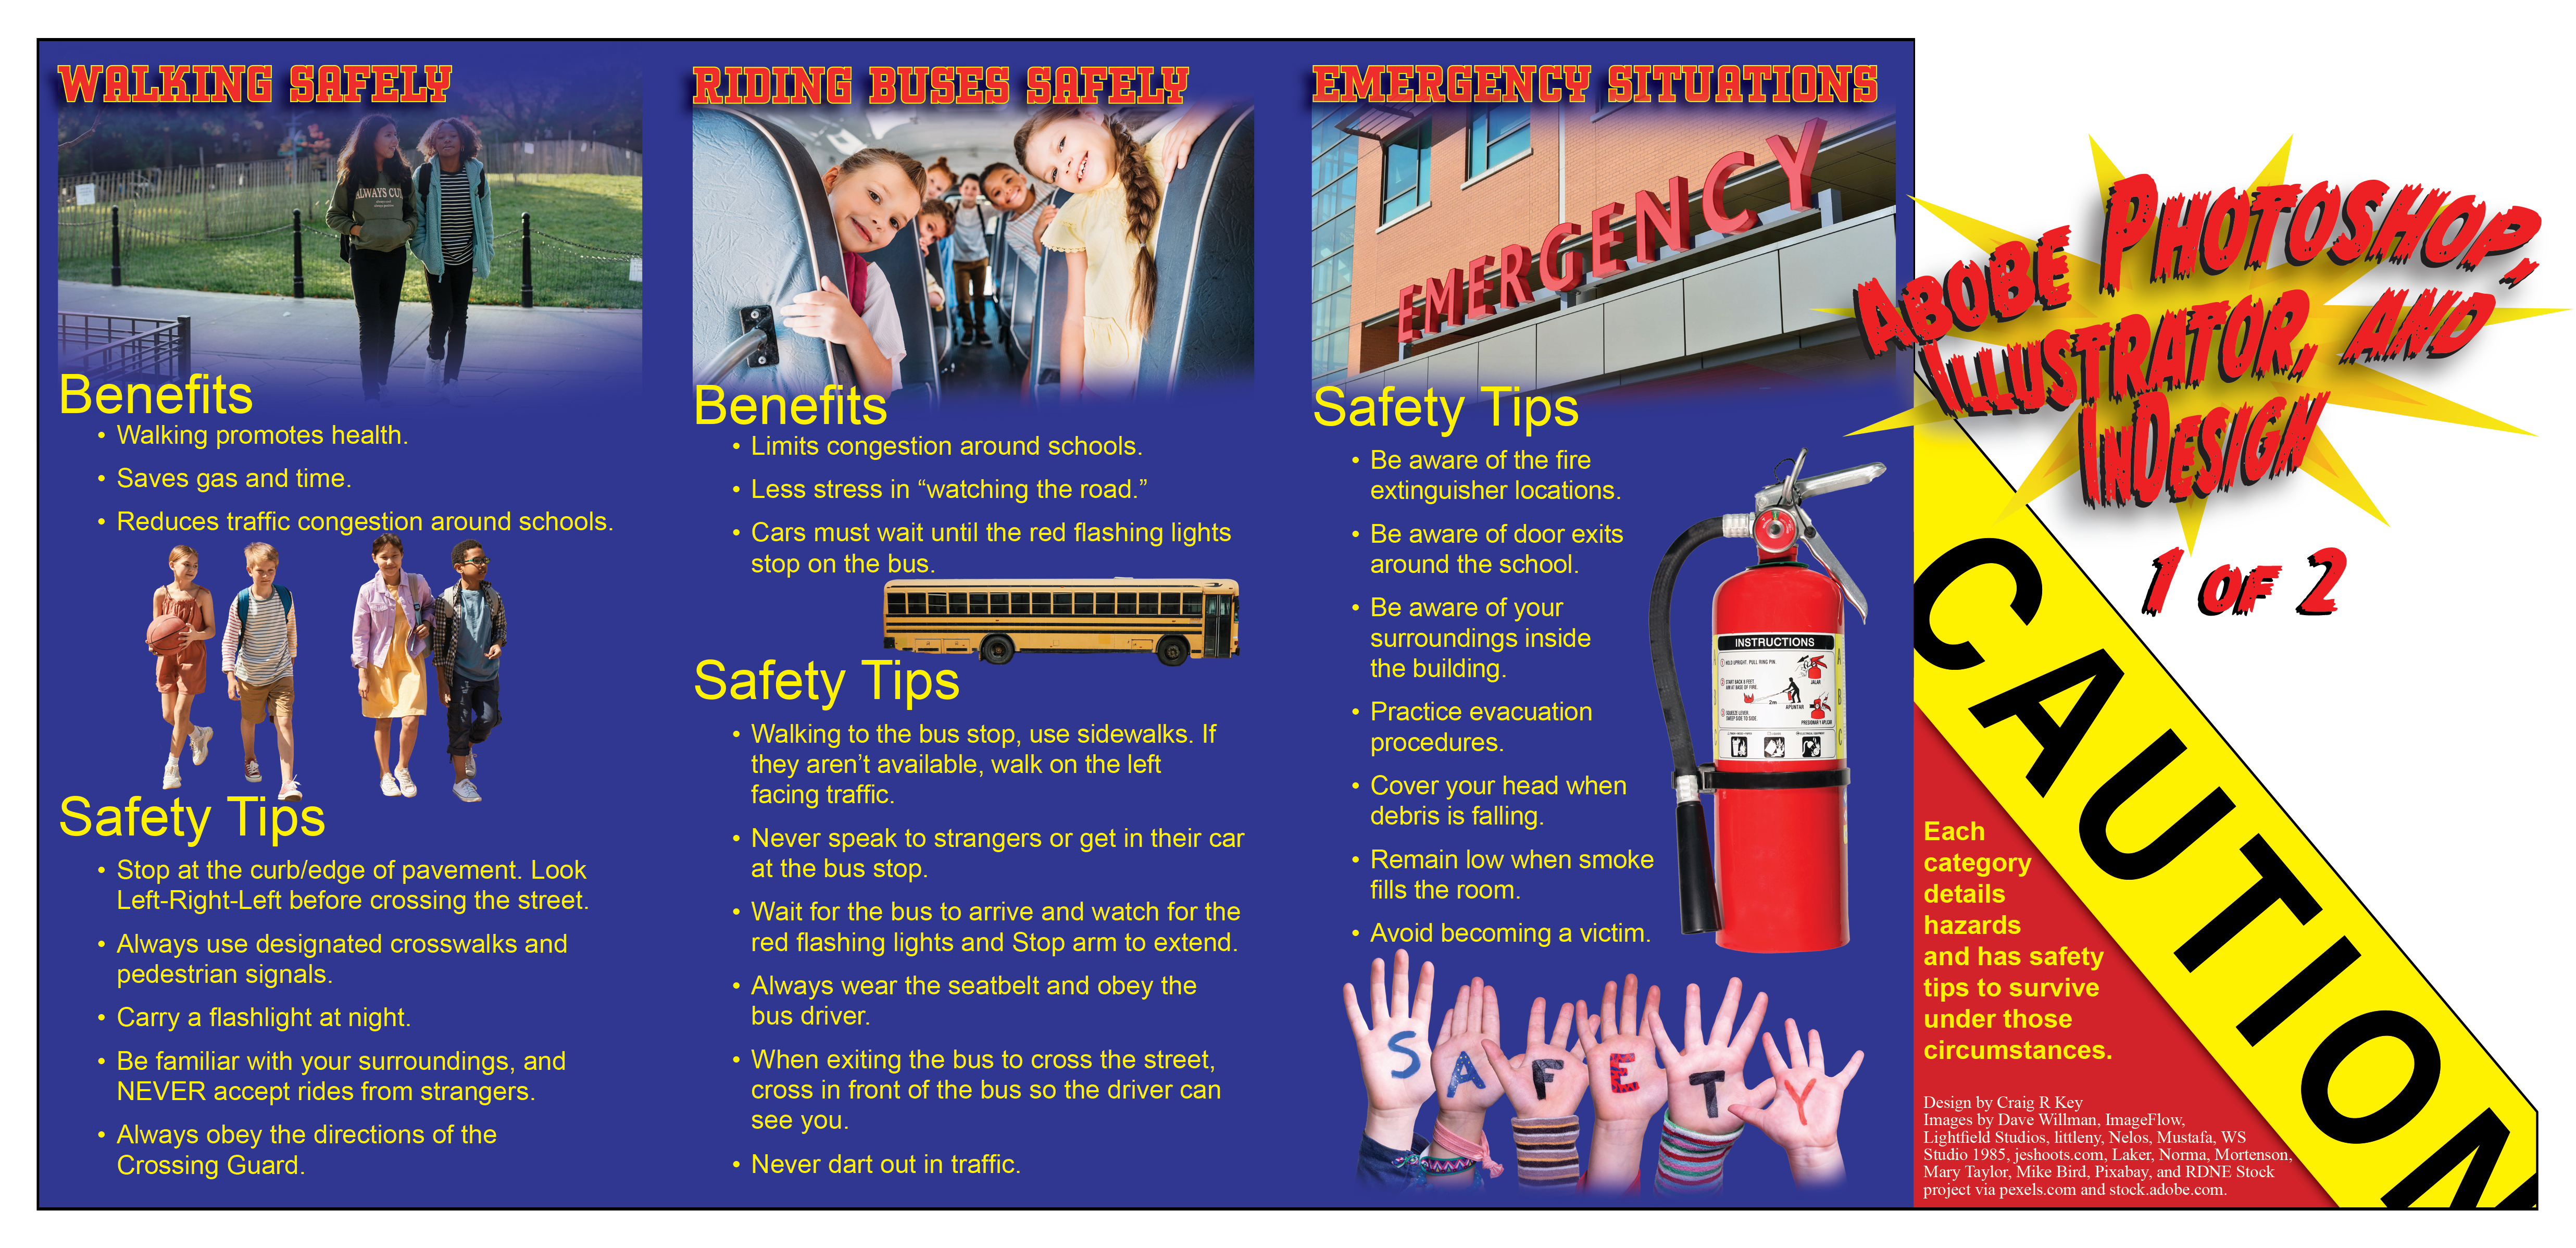 Brochure for Back to School Safety. Part 1 of 2. Created with Adobe Photoshop, Illustrator, and InDesign.